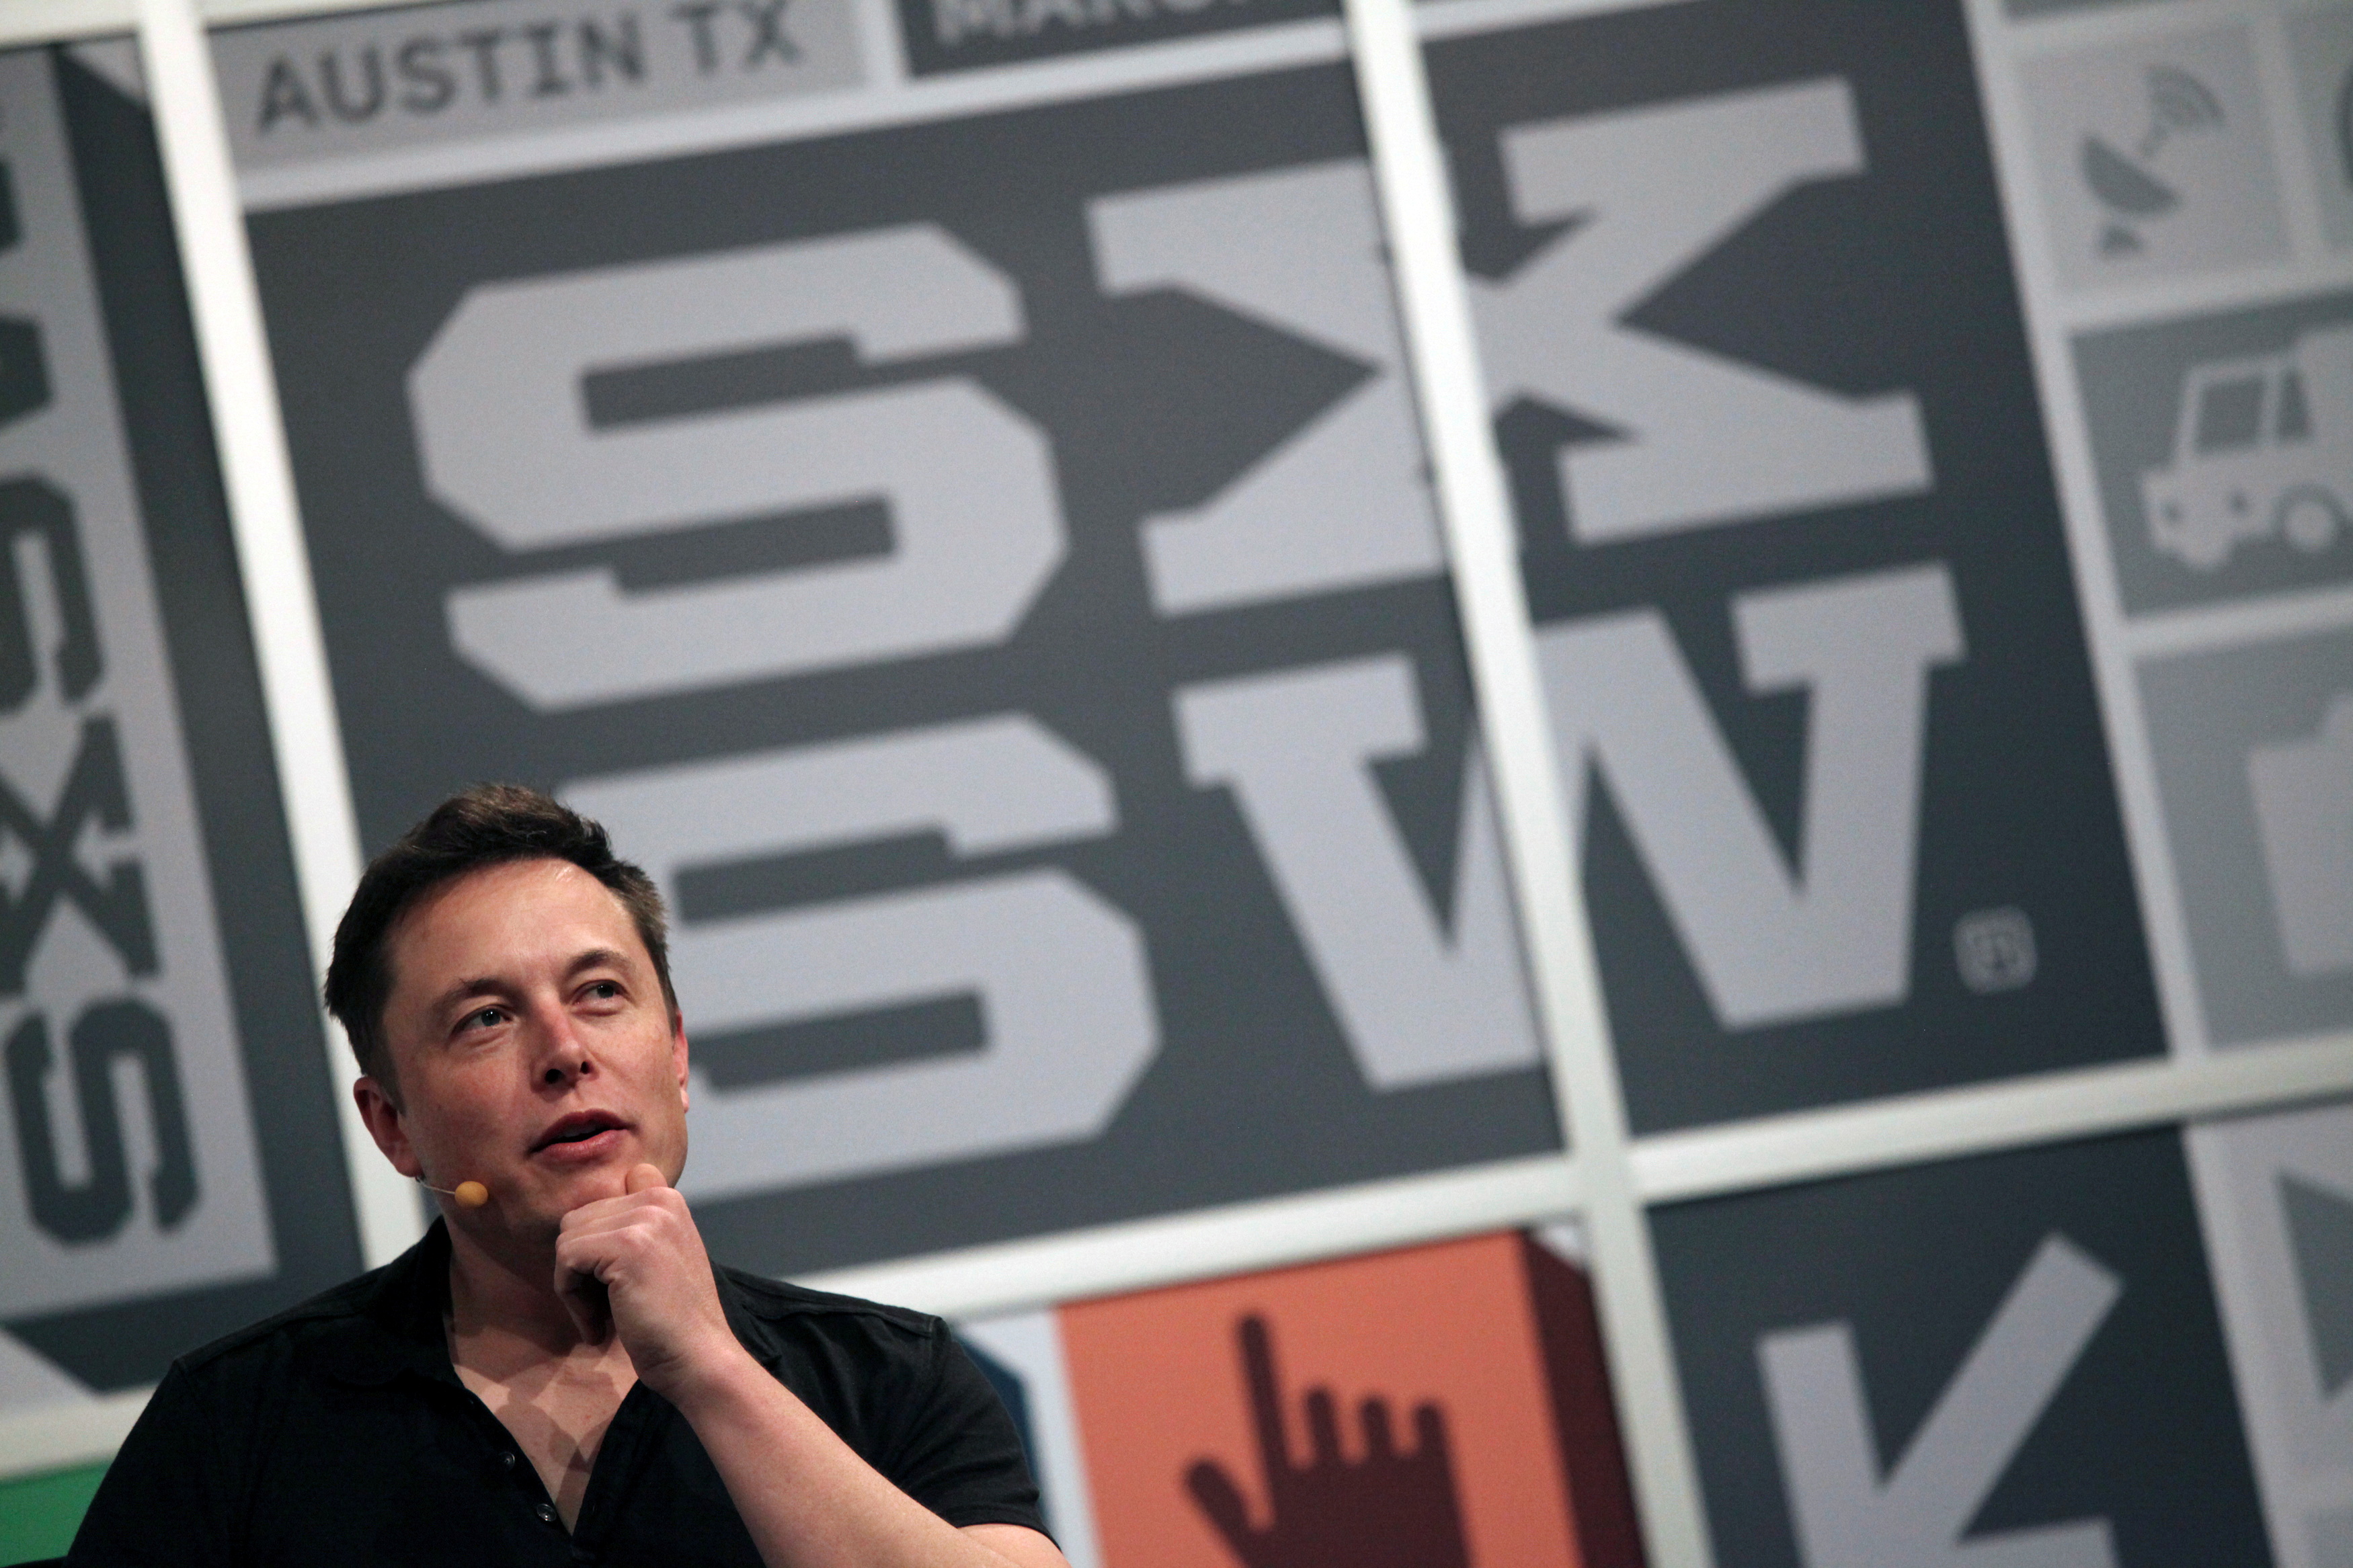 Elon Musk, the chief executive of Tesla Motor, speaks at the South by Southwest Interactive festival in Austin